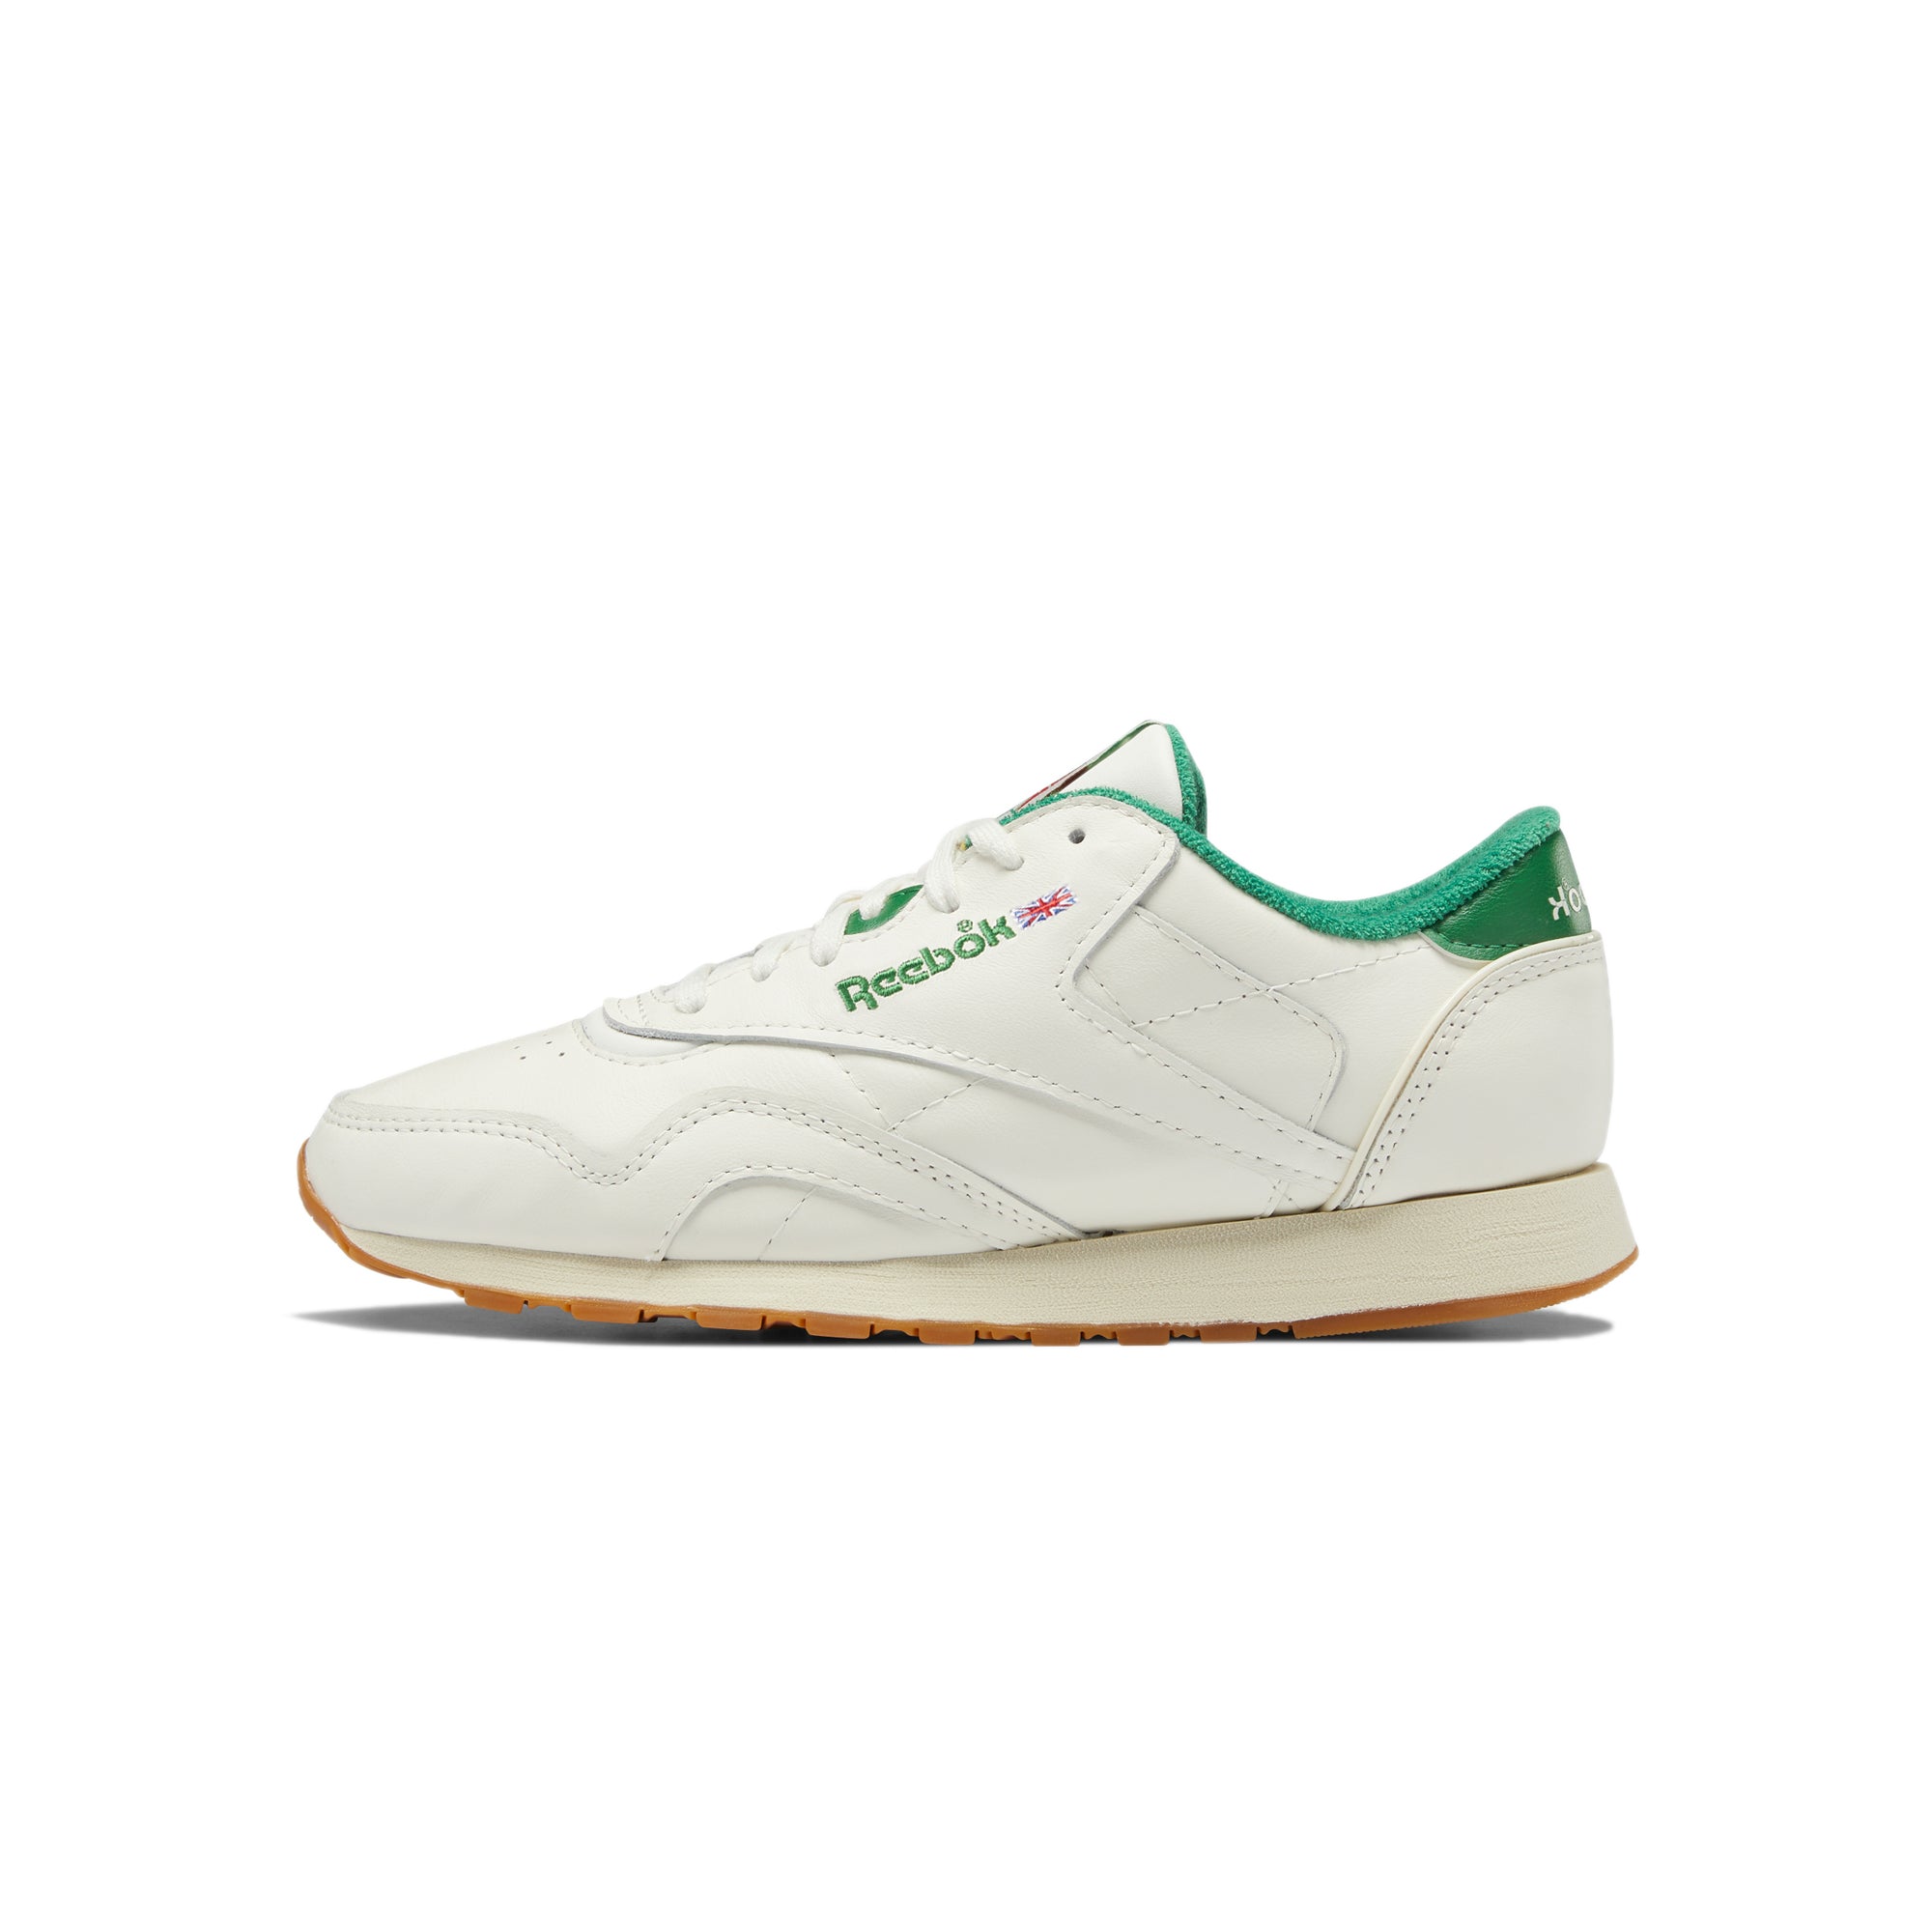 Plus Reebok Leather – Shoes Butter Classic Extra